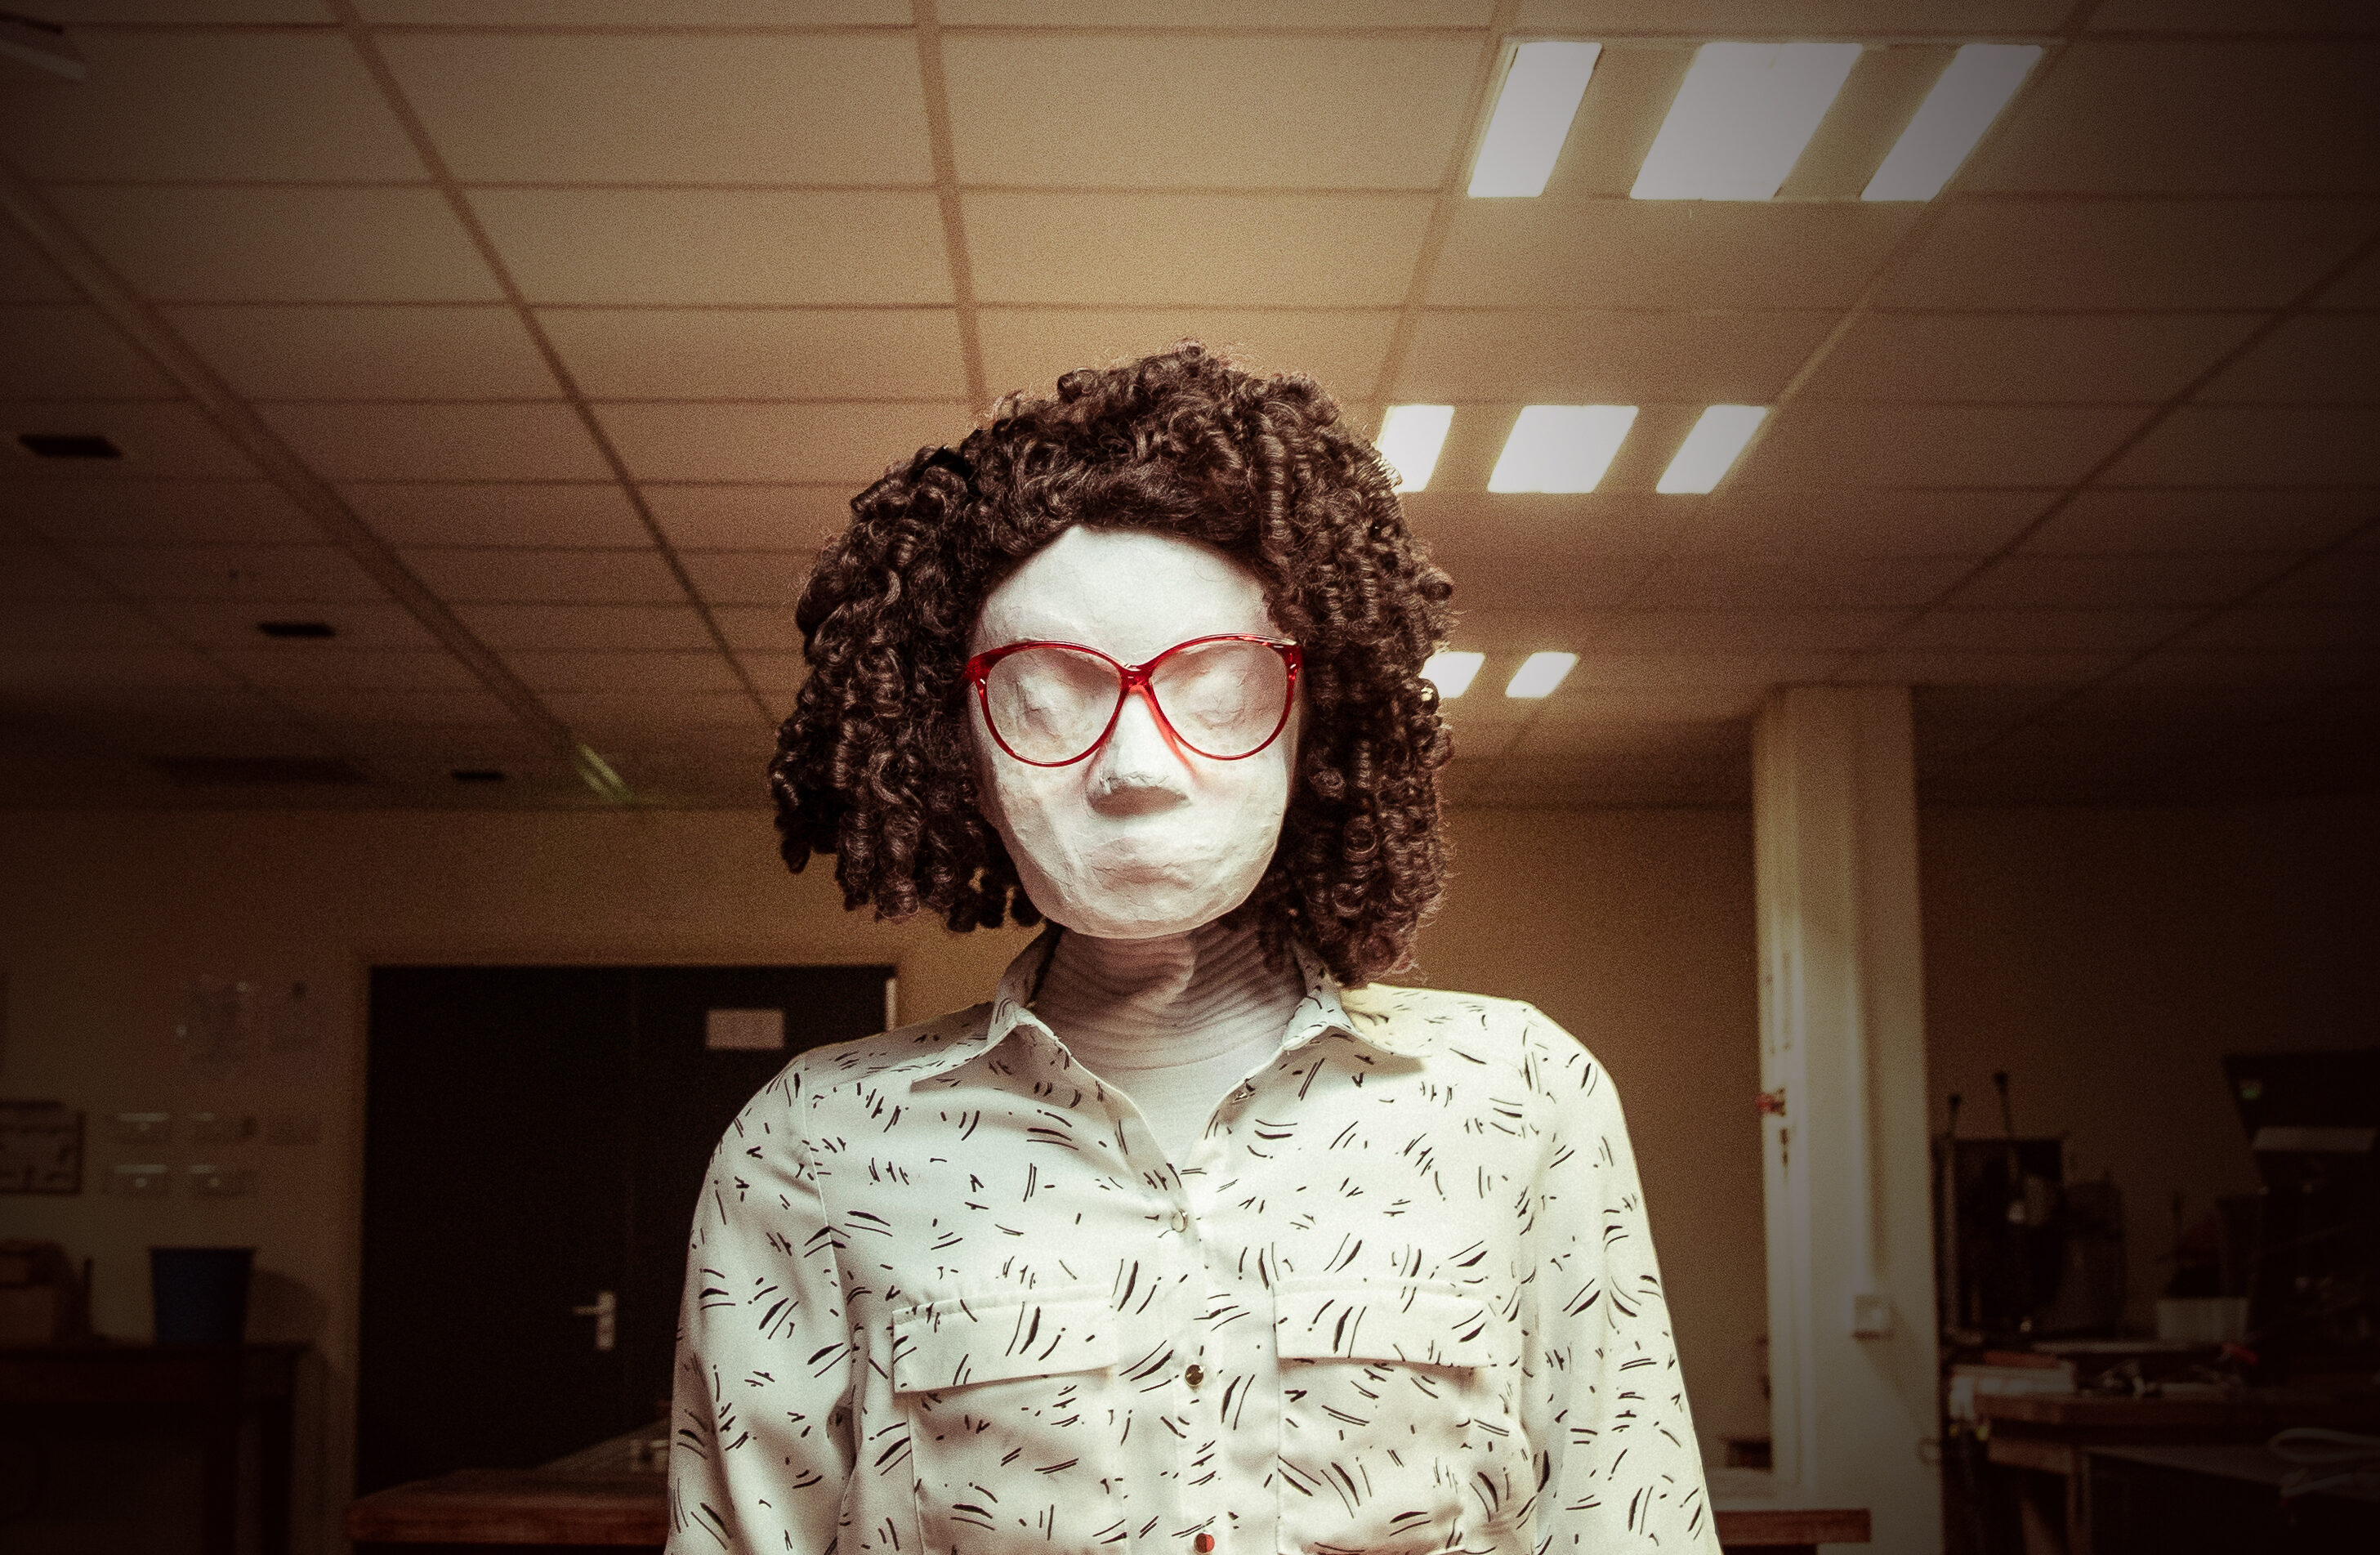 Kate, a female human sized puppet with red 80s glasses and a tight perm, sits behind a dark brown wooden desk in a badly lit office space. In the background there are some computers and equipment on other desks. Kate is looking directly at the camera.